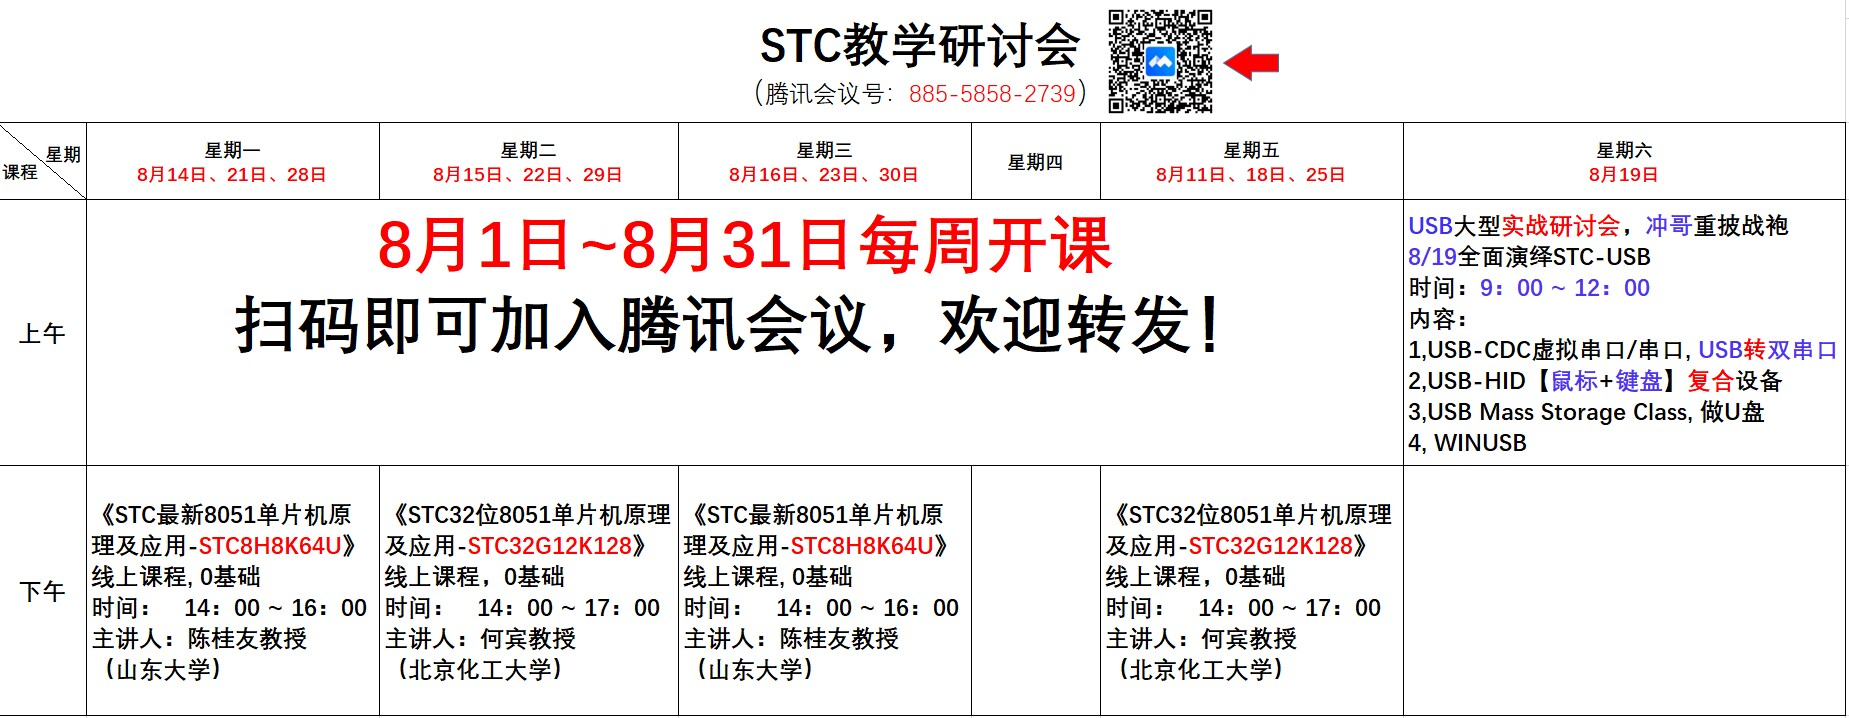 STC8H8K64U-45I-SOP16管脚图；STC8H1K08T-33I-SOP16管脚图-1.png